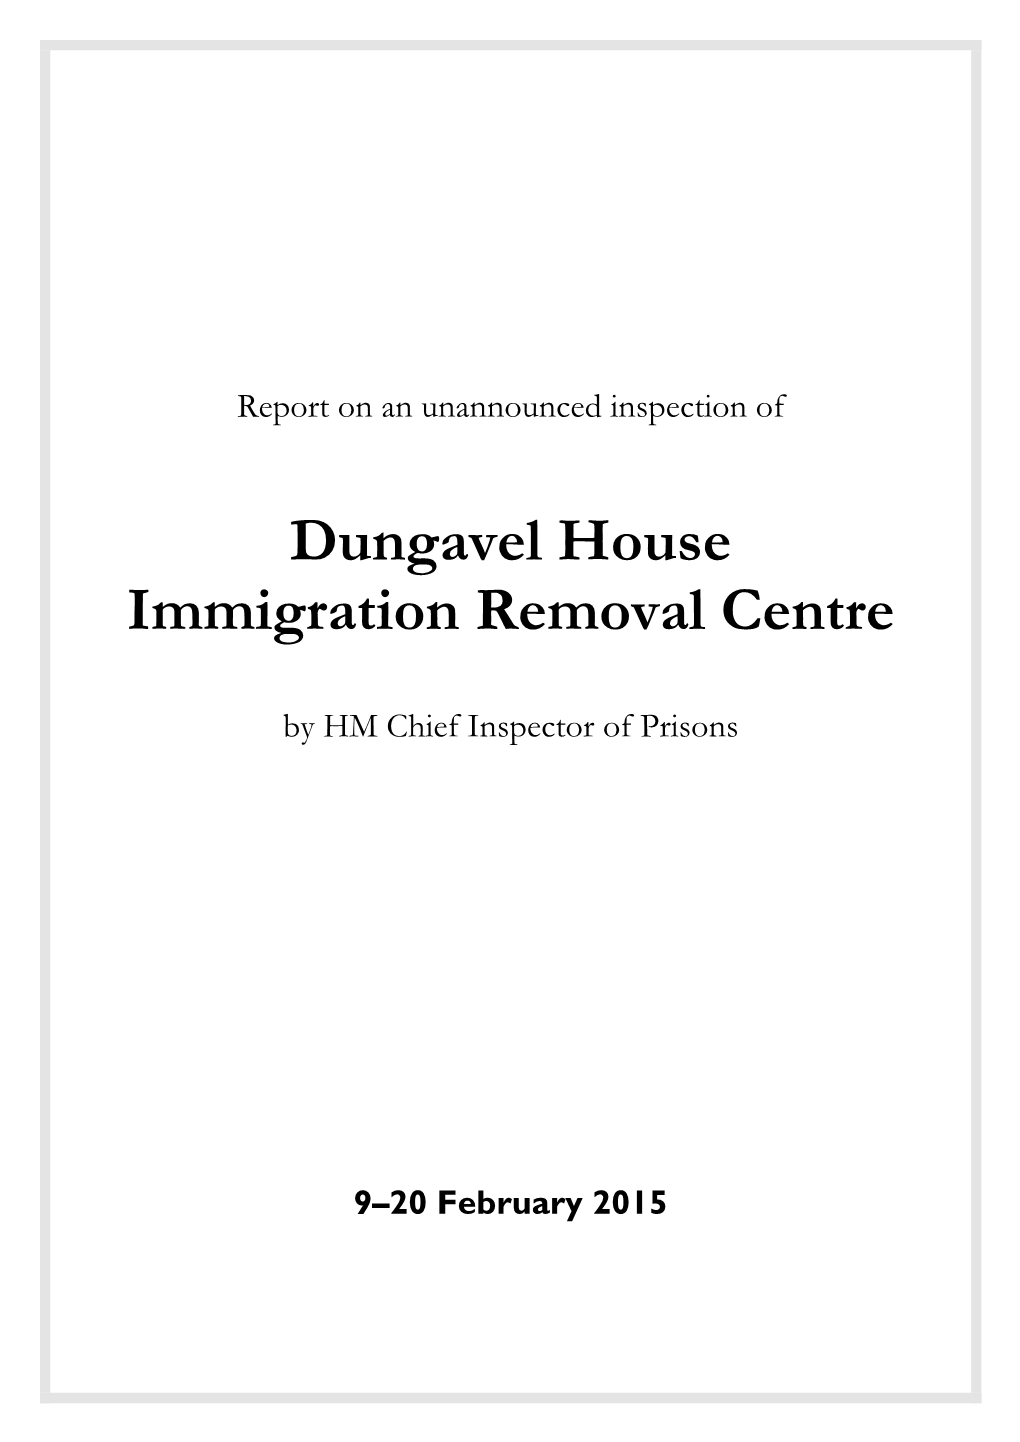 Dungavel House Immigration Removal Centre